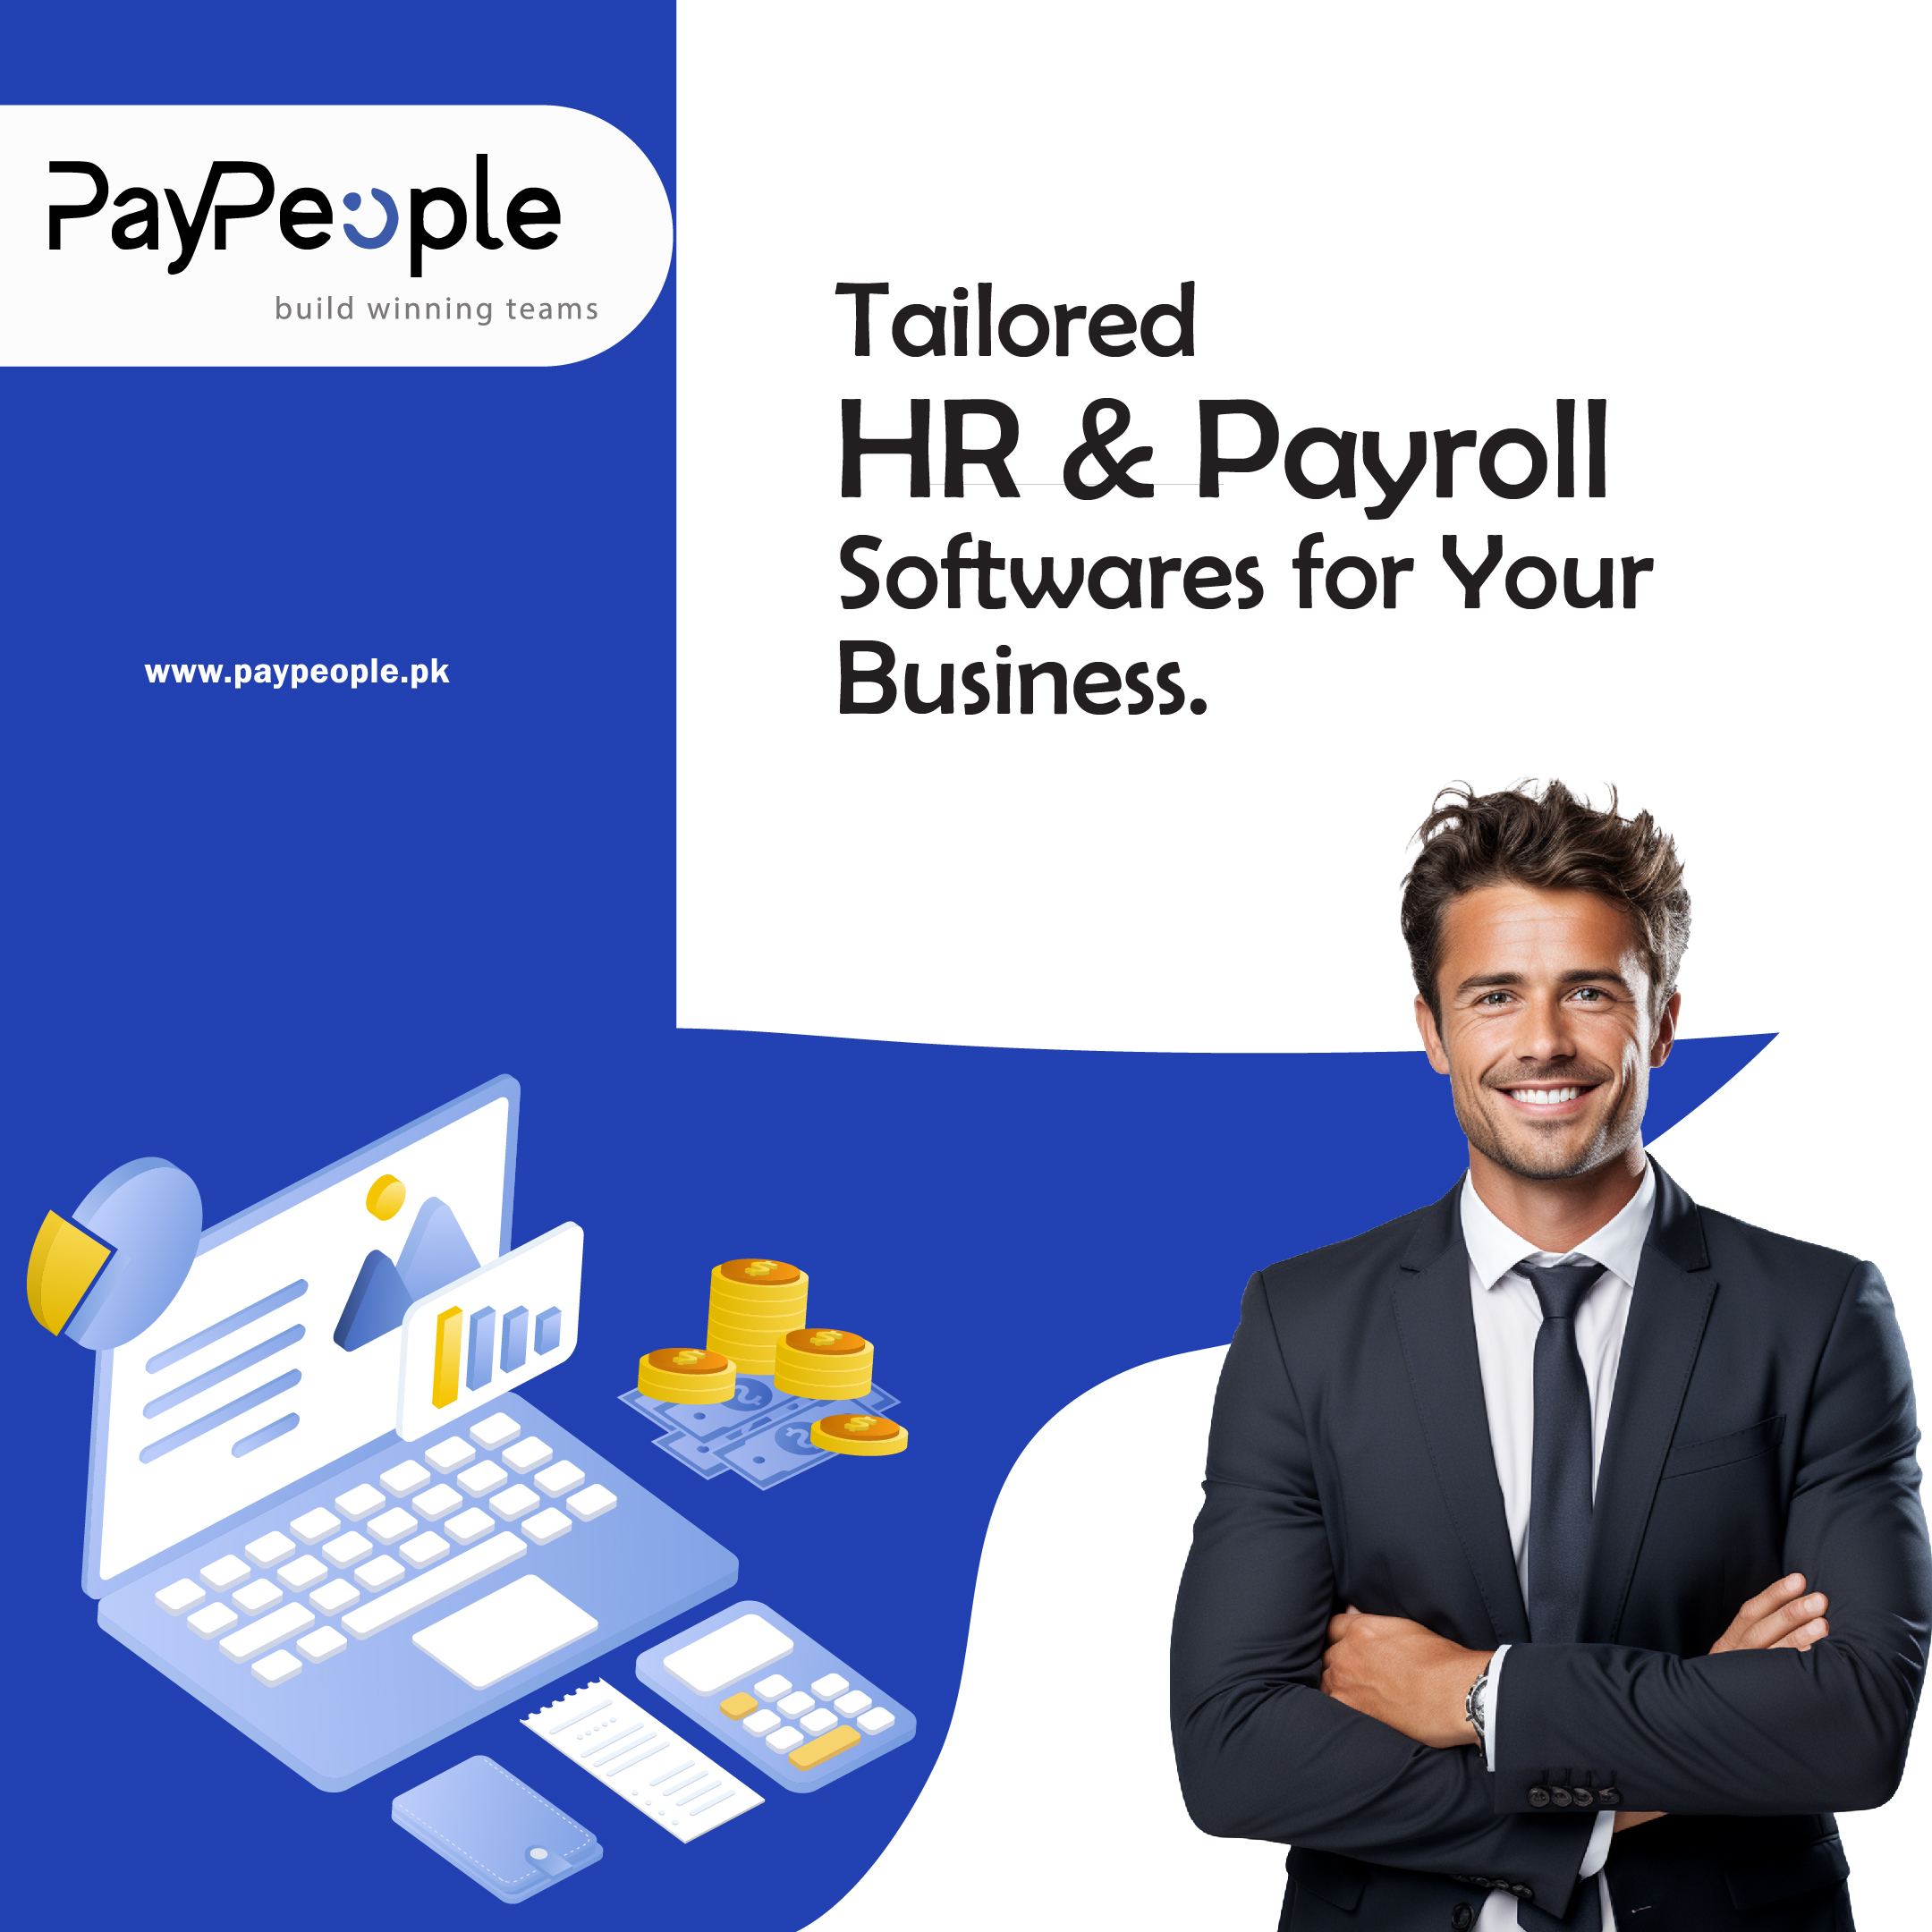 What steps involved in the Payroll Management processing cycle?